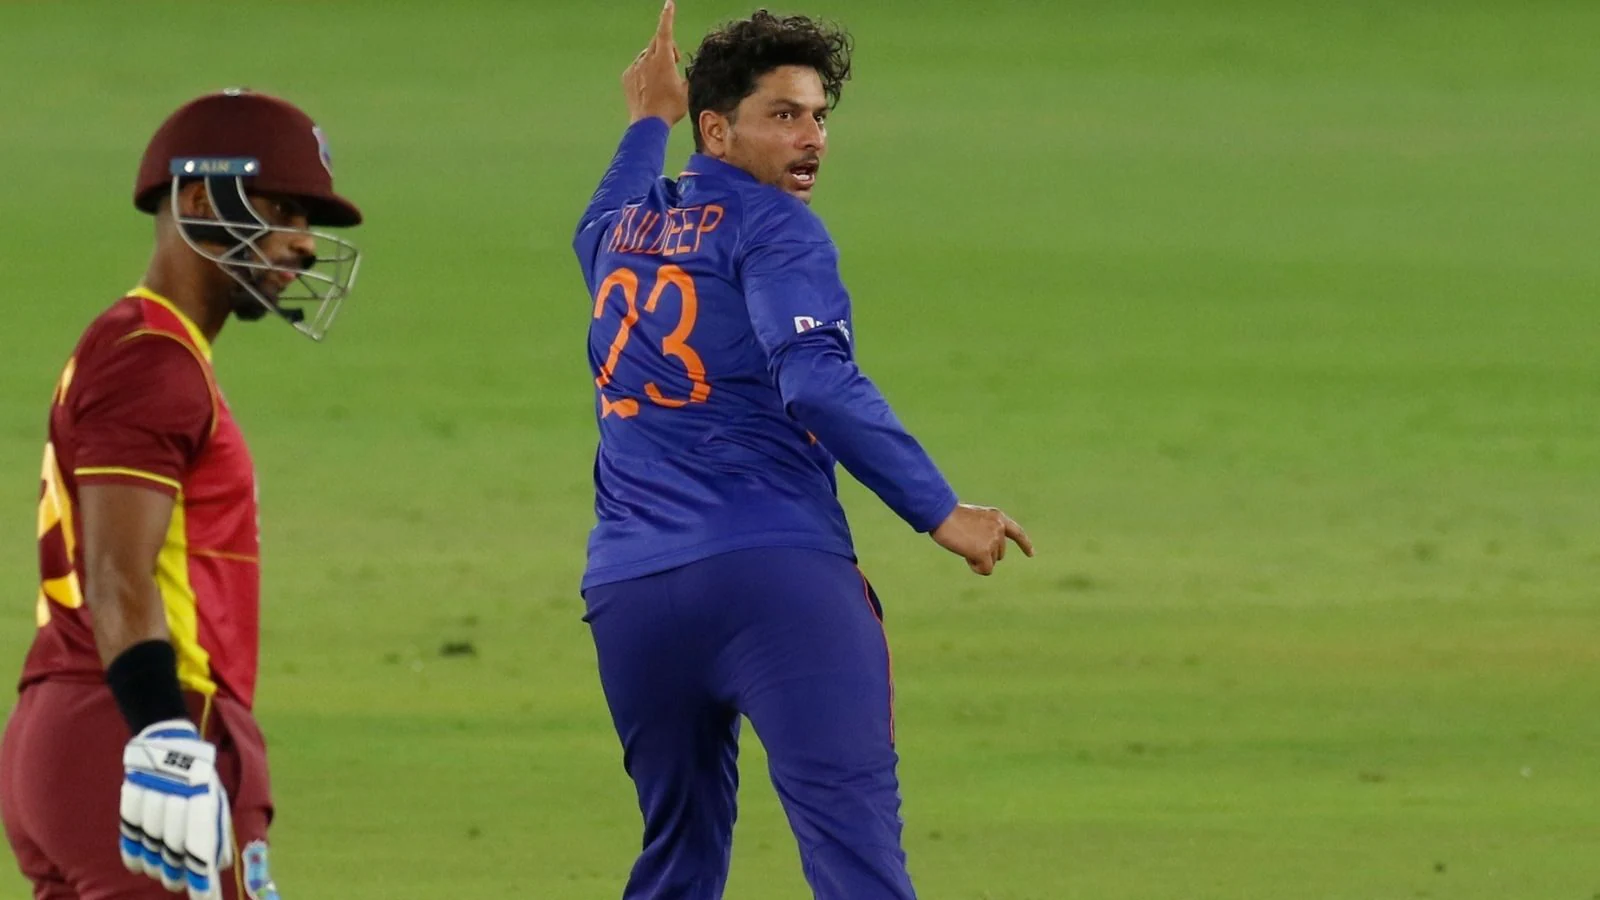 Kuldeep Yadav Brings in a Variation Which is Very Difficult to Understand: Chetan Sharma